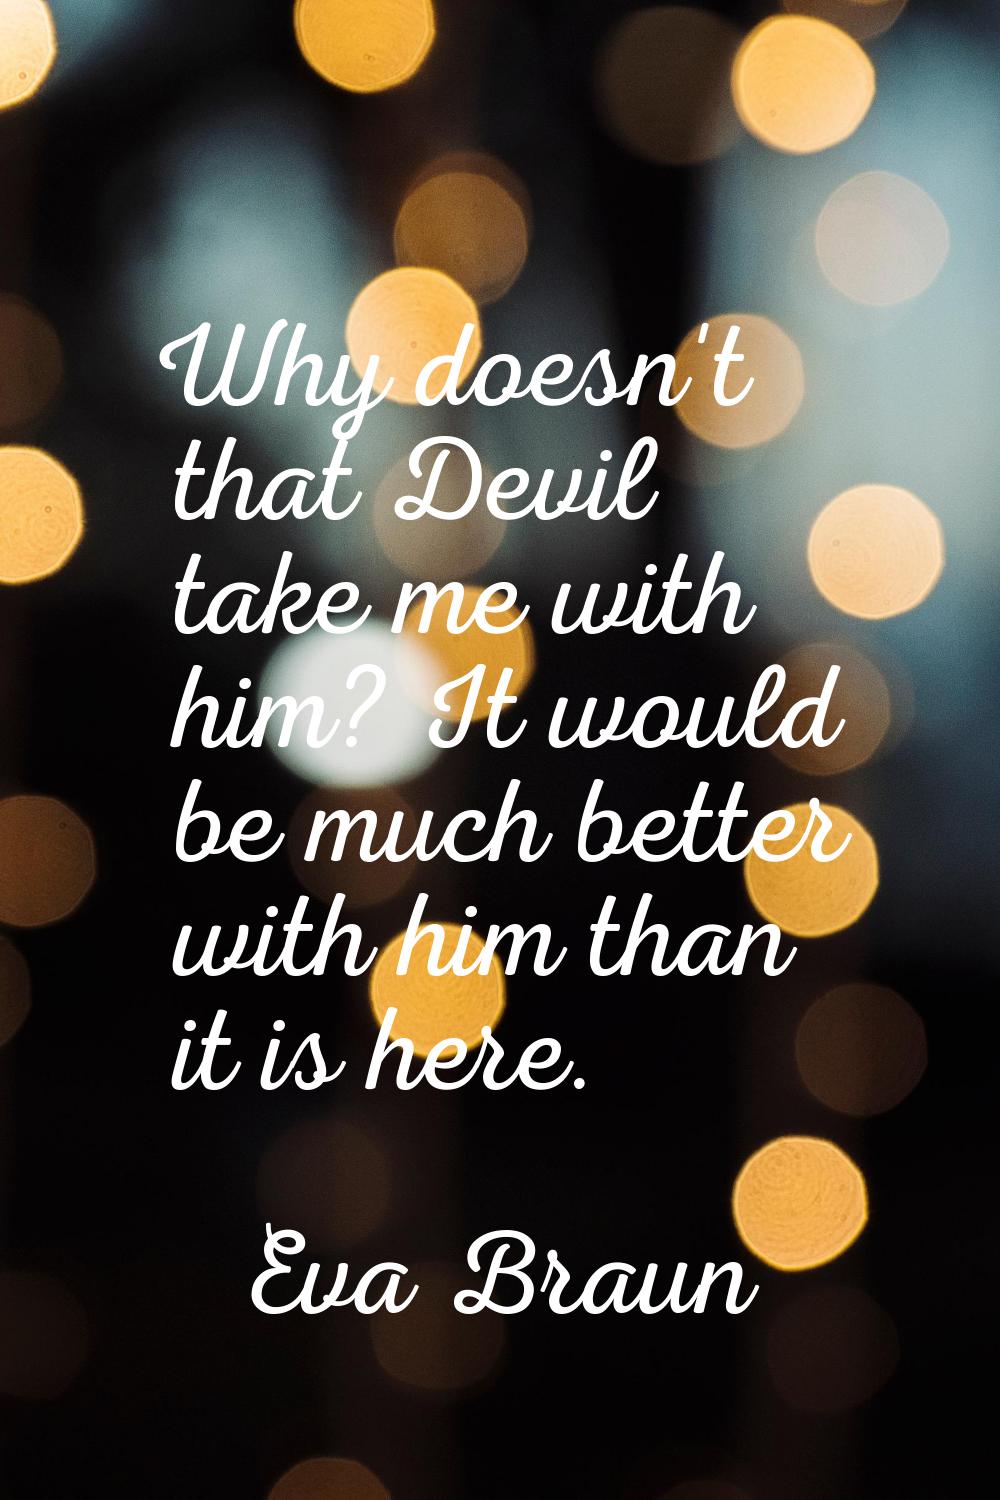 Why doesn't that Devil take me with him? It would be much better with him than it is here.